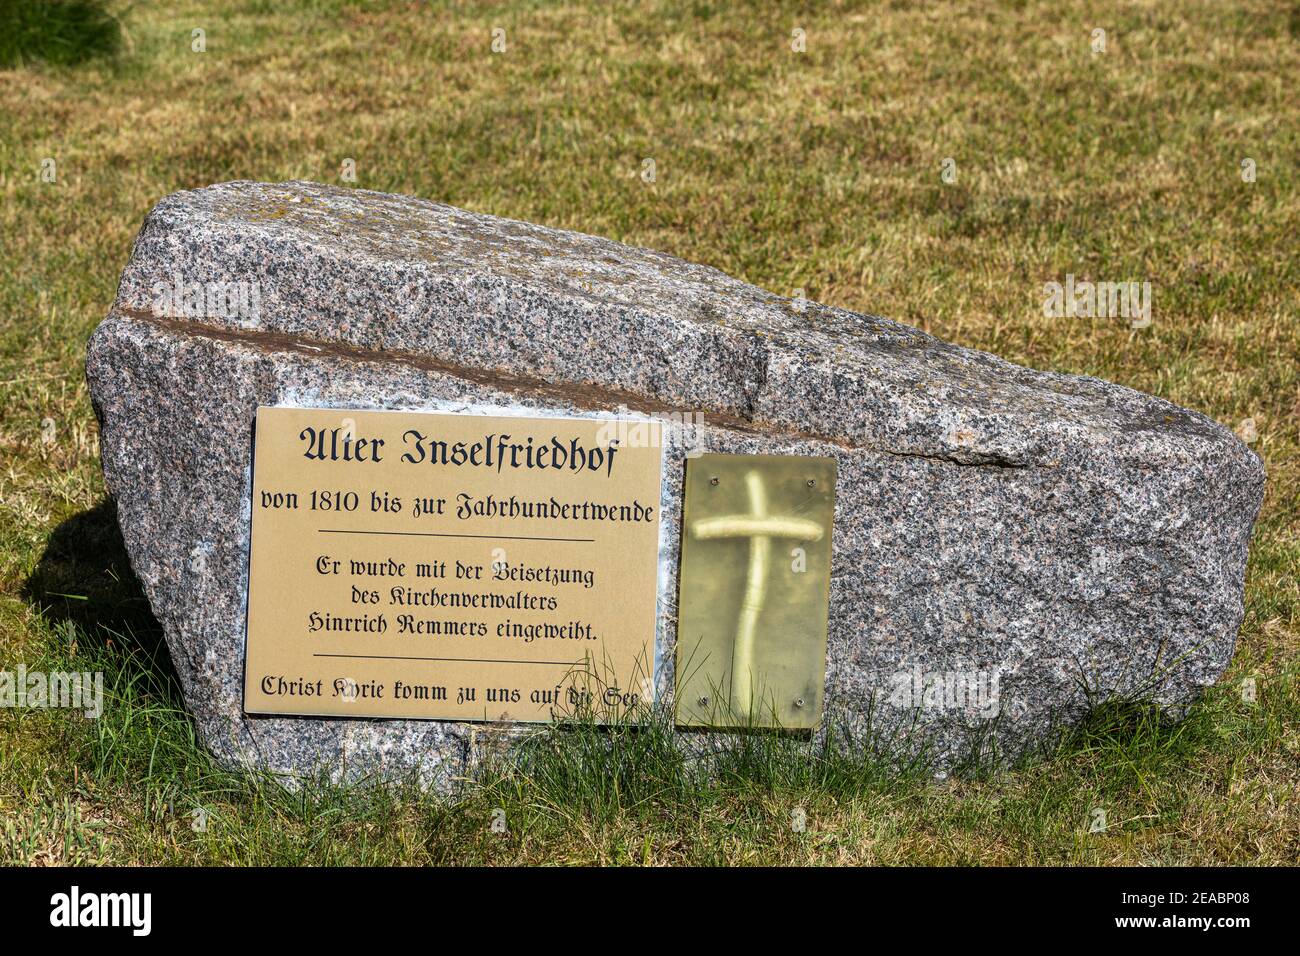 Memorial stone with the inscription Alter Inselfriedhof from 1810 to the turn of the century, next to the Old Island Church, Westdorf, East Frisian island Baltrum, Lower Saxony, Stock Photo